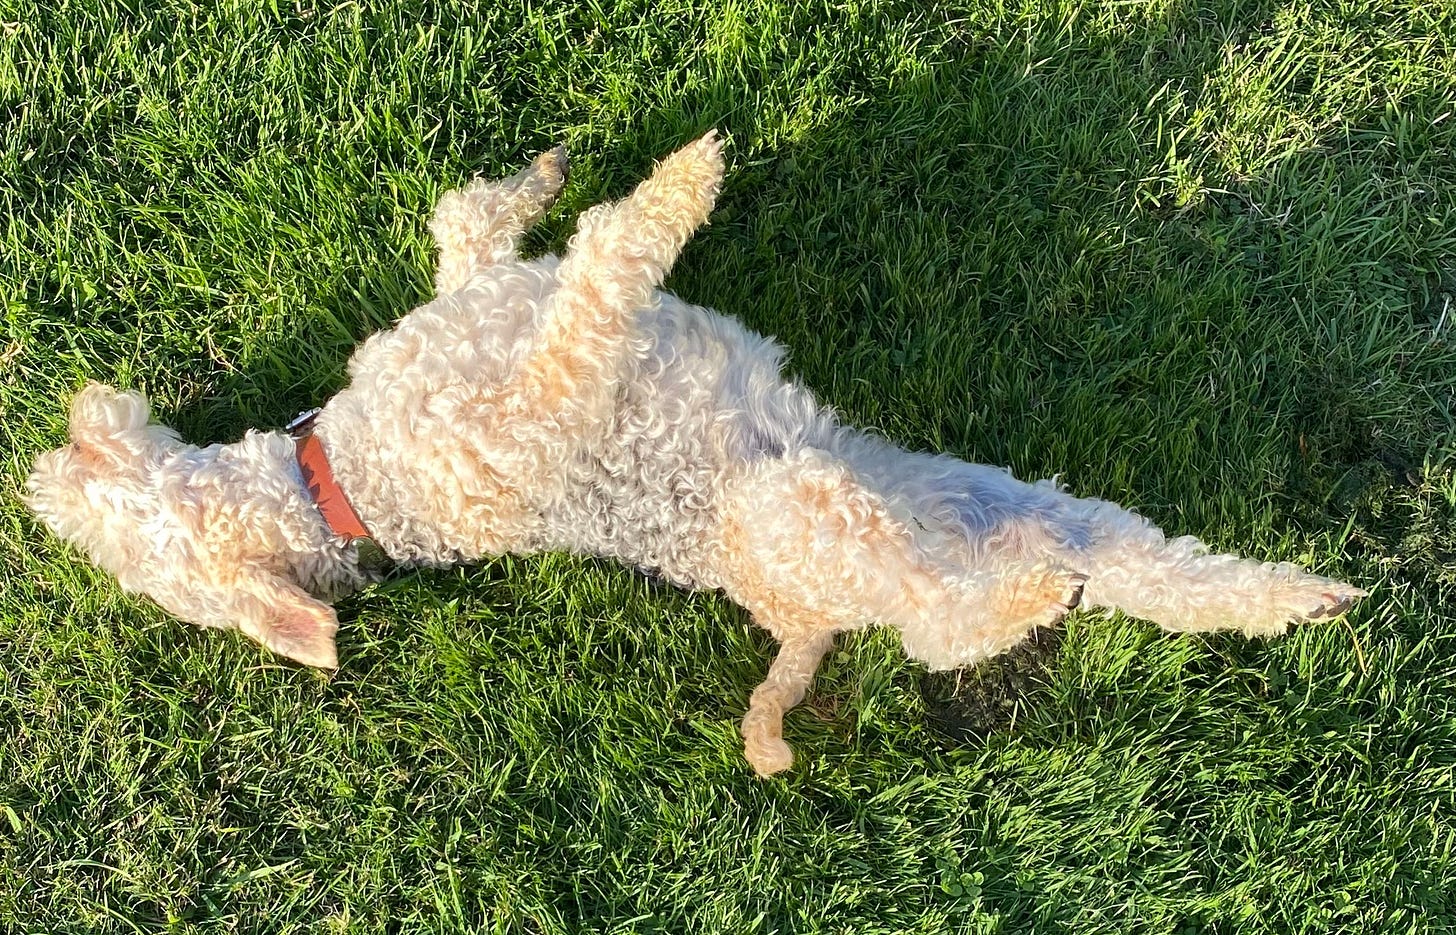 Nutmeg the lakeland terrier rolling on luscious green grass.